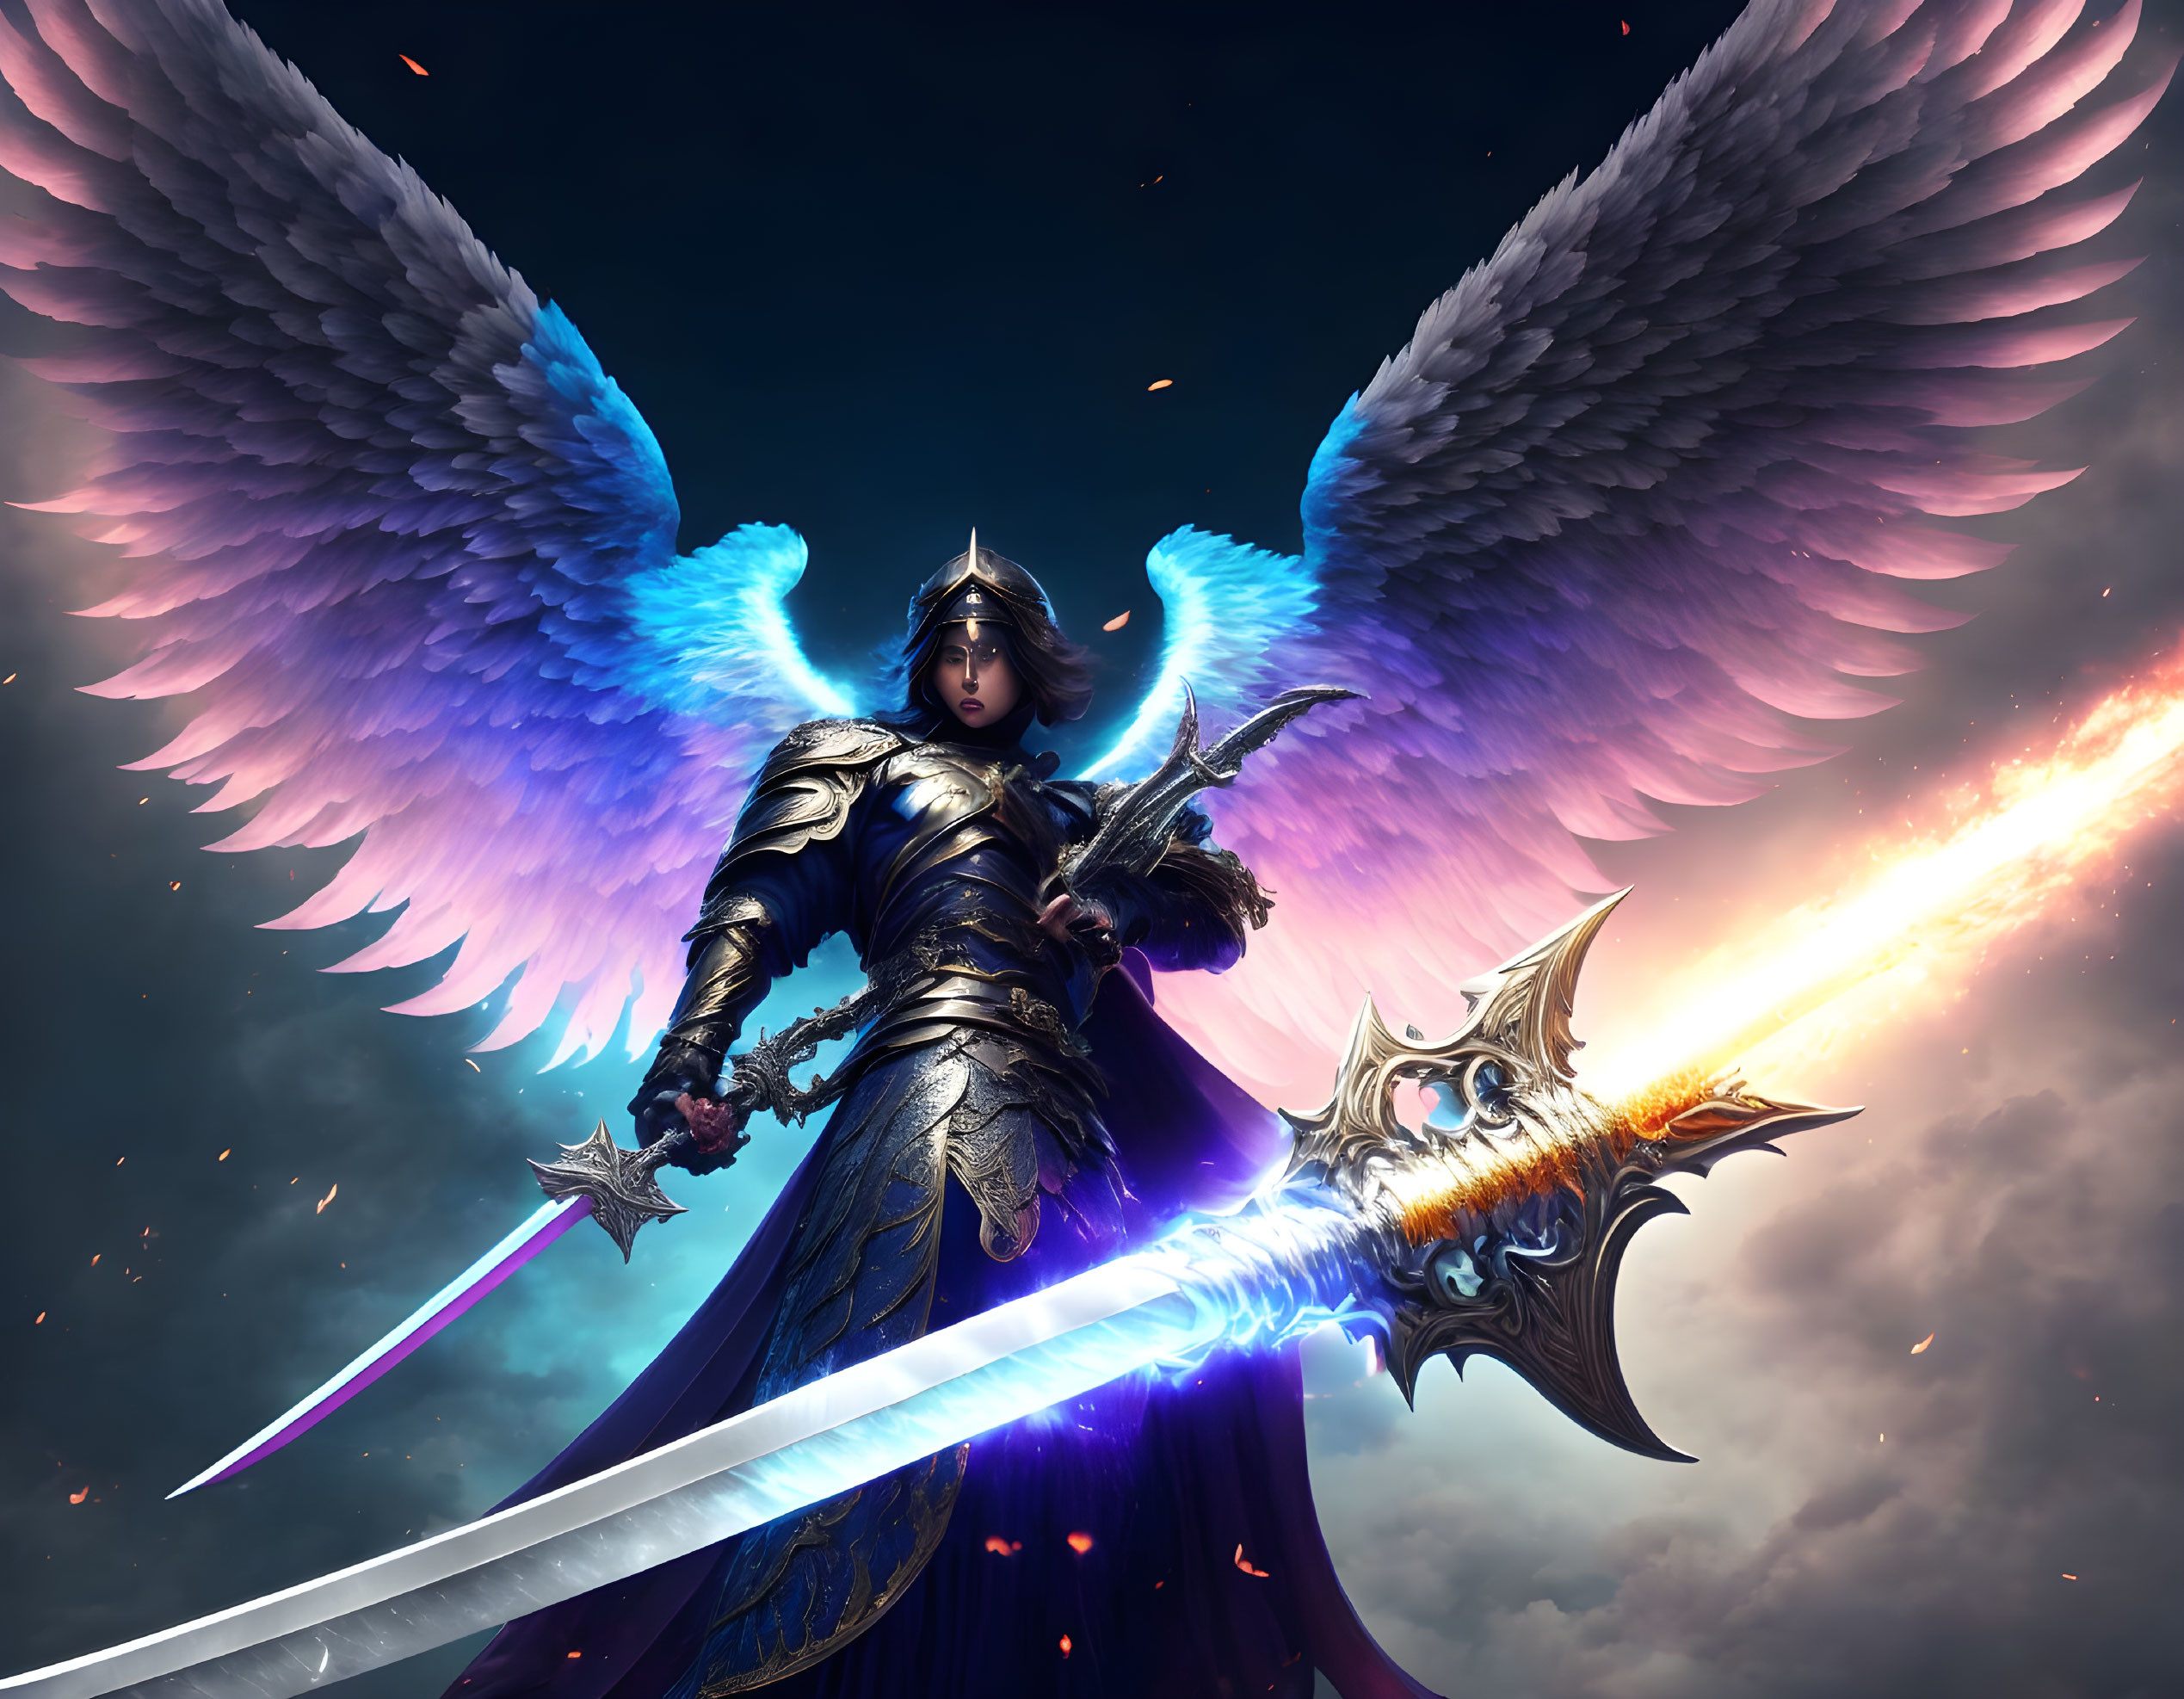 Figure in black armor with glowing sword and wings against dramatic sky.